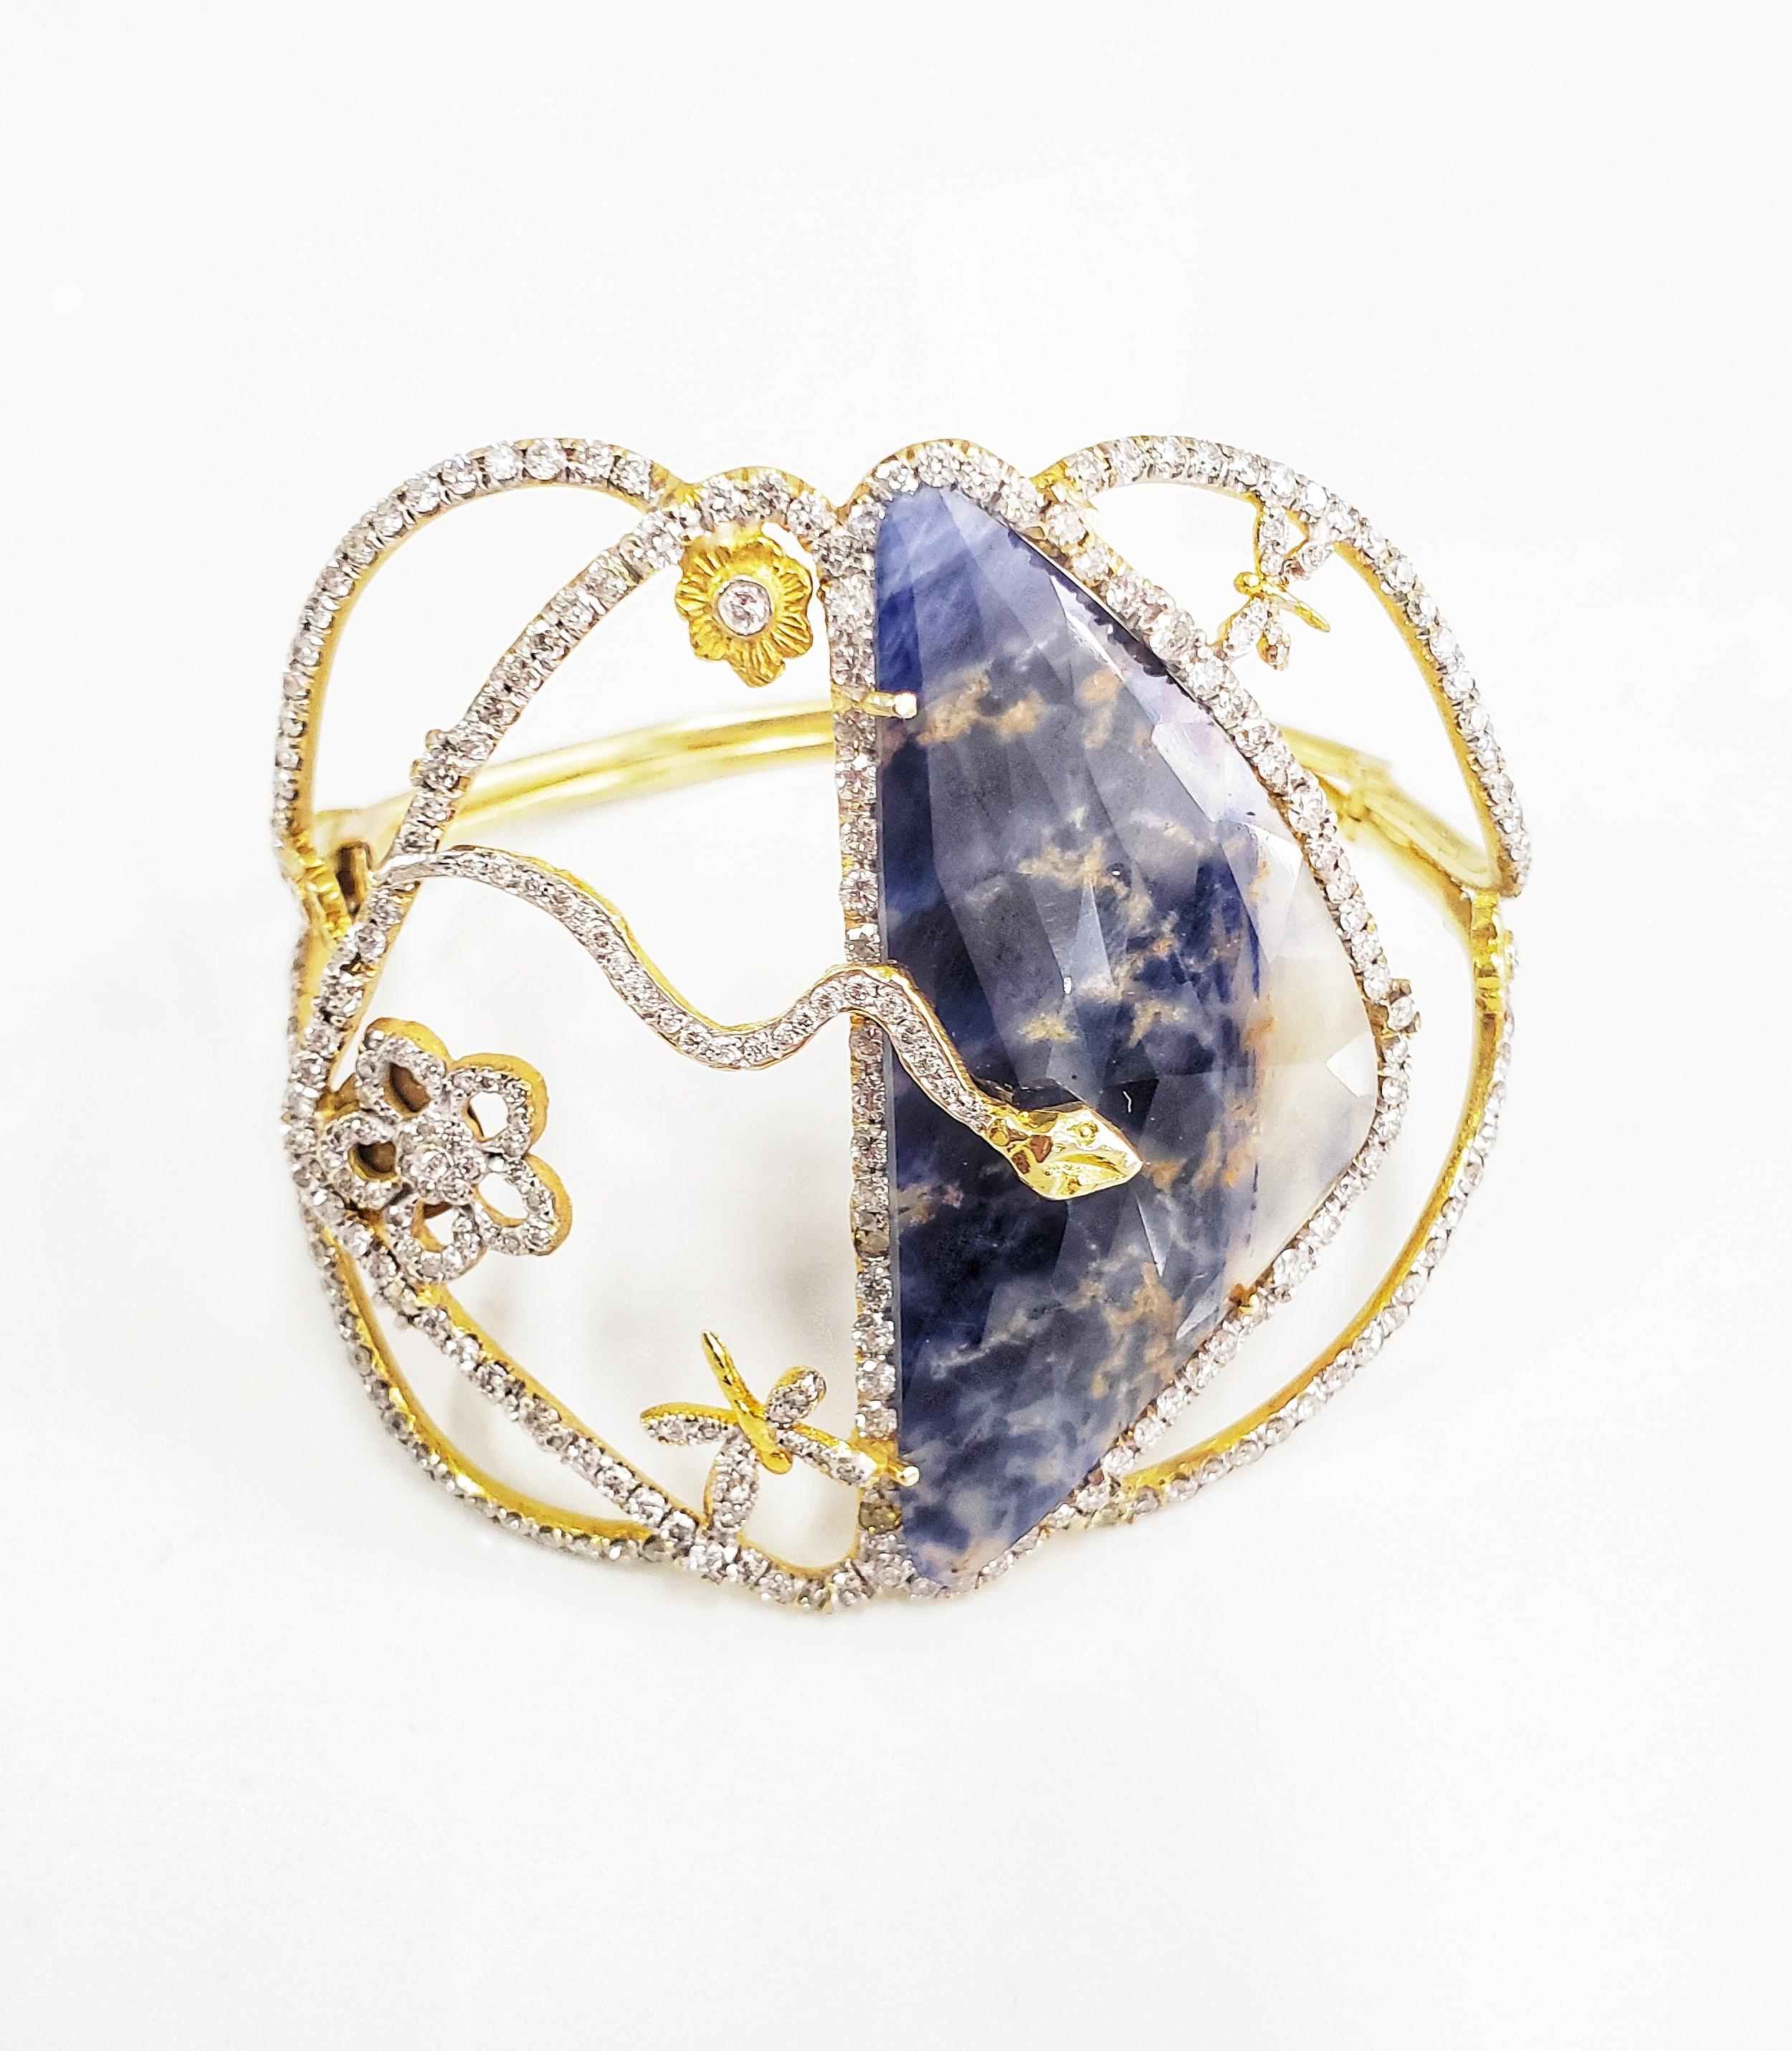 Tanya Farah cuff boasts exquisite motifs from the Garden of Eden.  One-of-a-kind natural blue sapphire is showcased in center and surrounded by champagne and white diamond halos.  Beautiful diamond animals and flowers grace the garden of this large